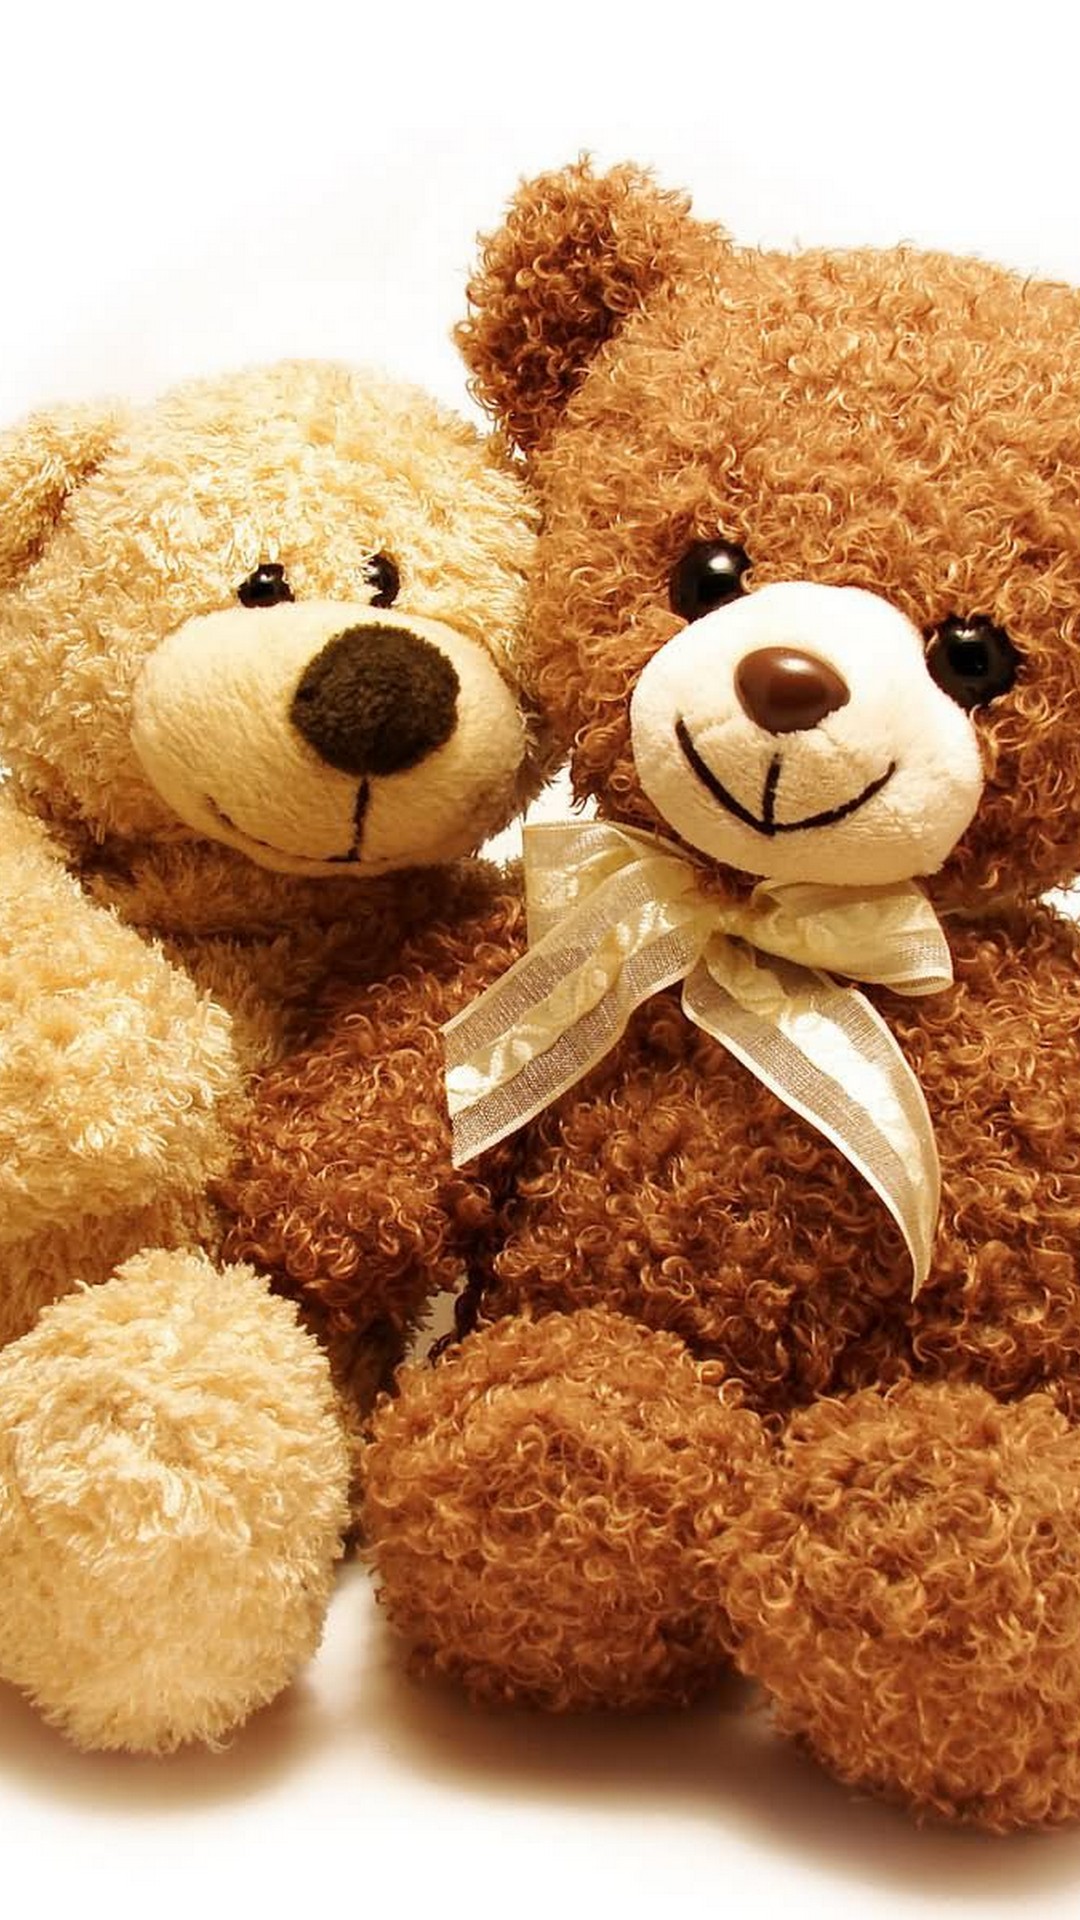 Teddy Bear Giant Android Wallpaper with image resolution 1080x1920 pixel. You can make this wallpaper for your Android backgrounds, Tablet, Smartphones Screensavers and Mobile Phone Lock Screen